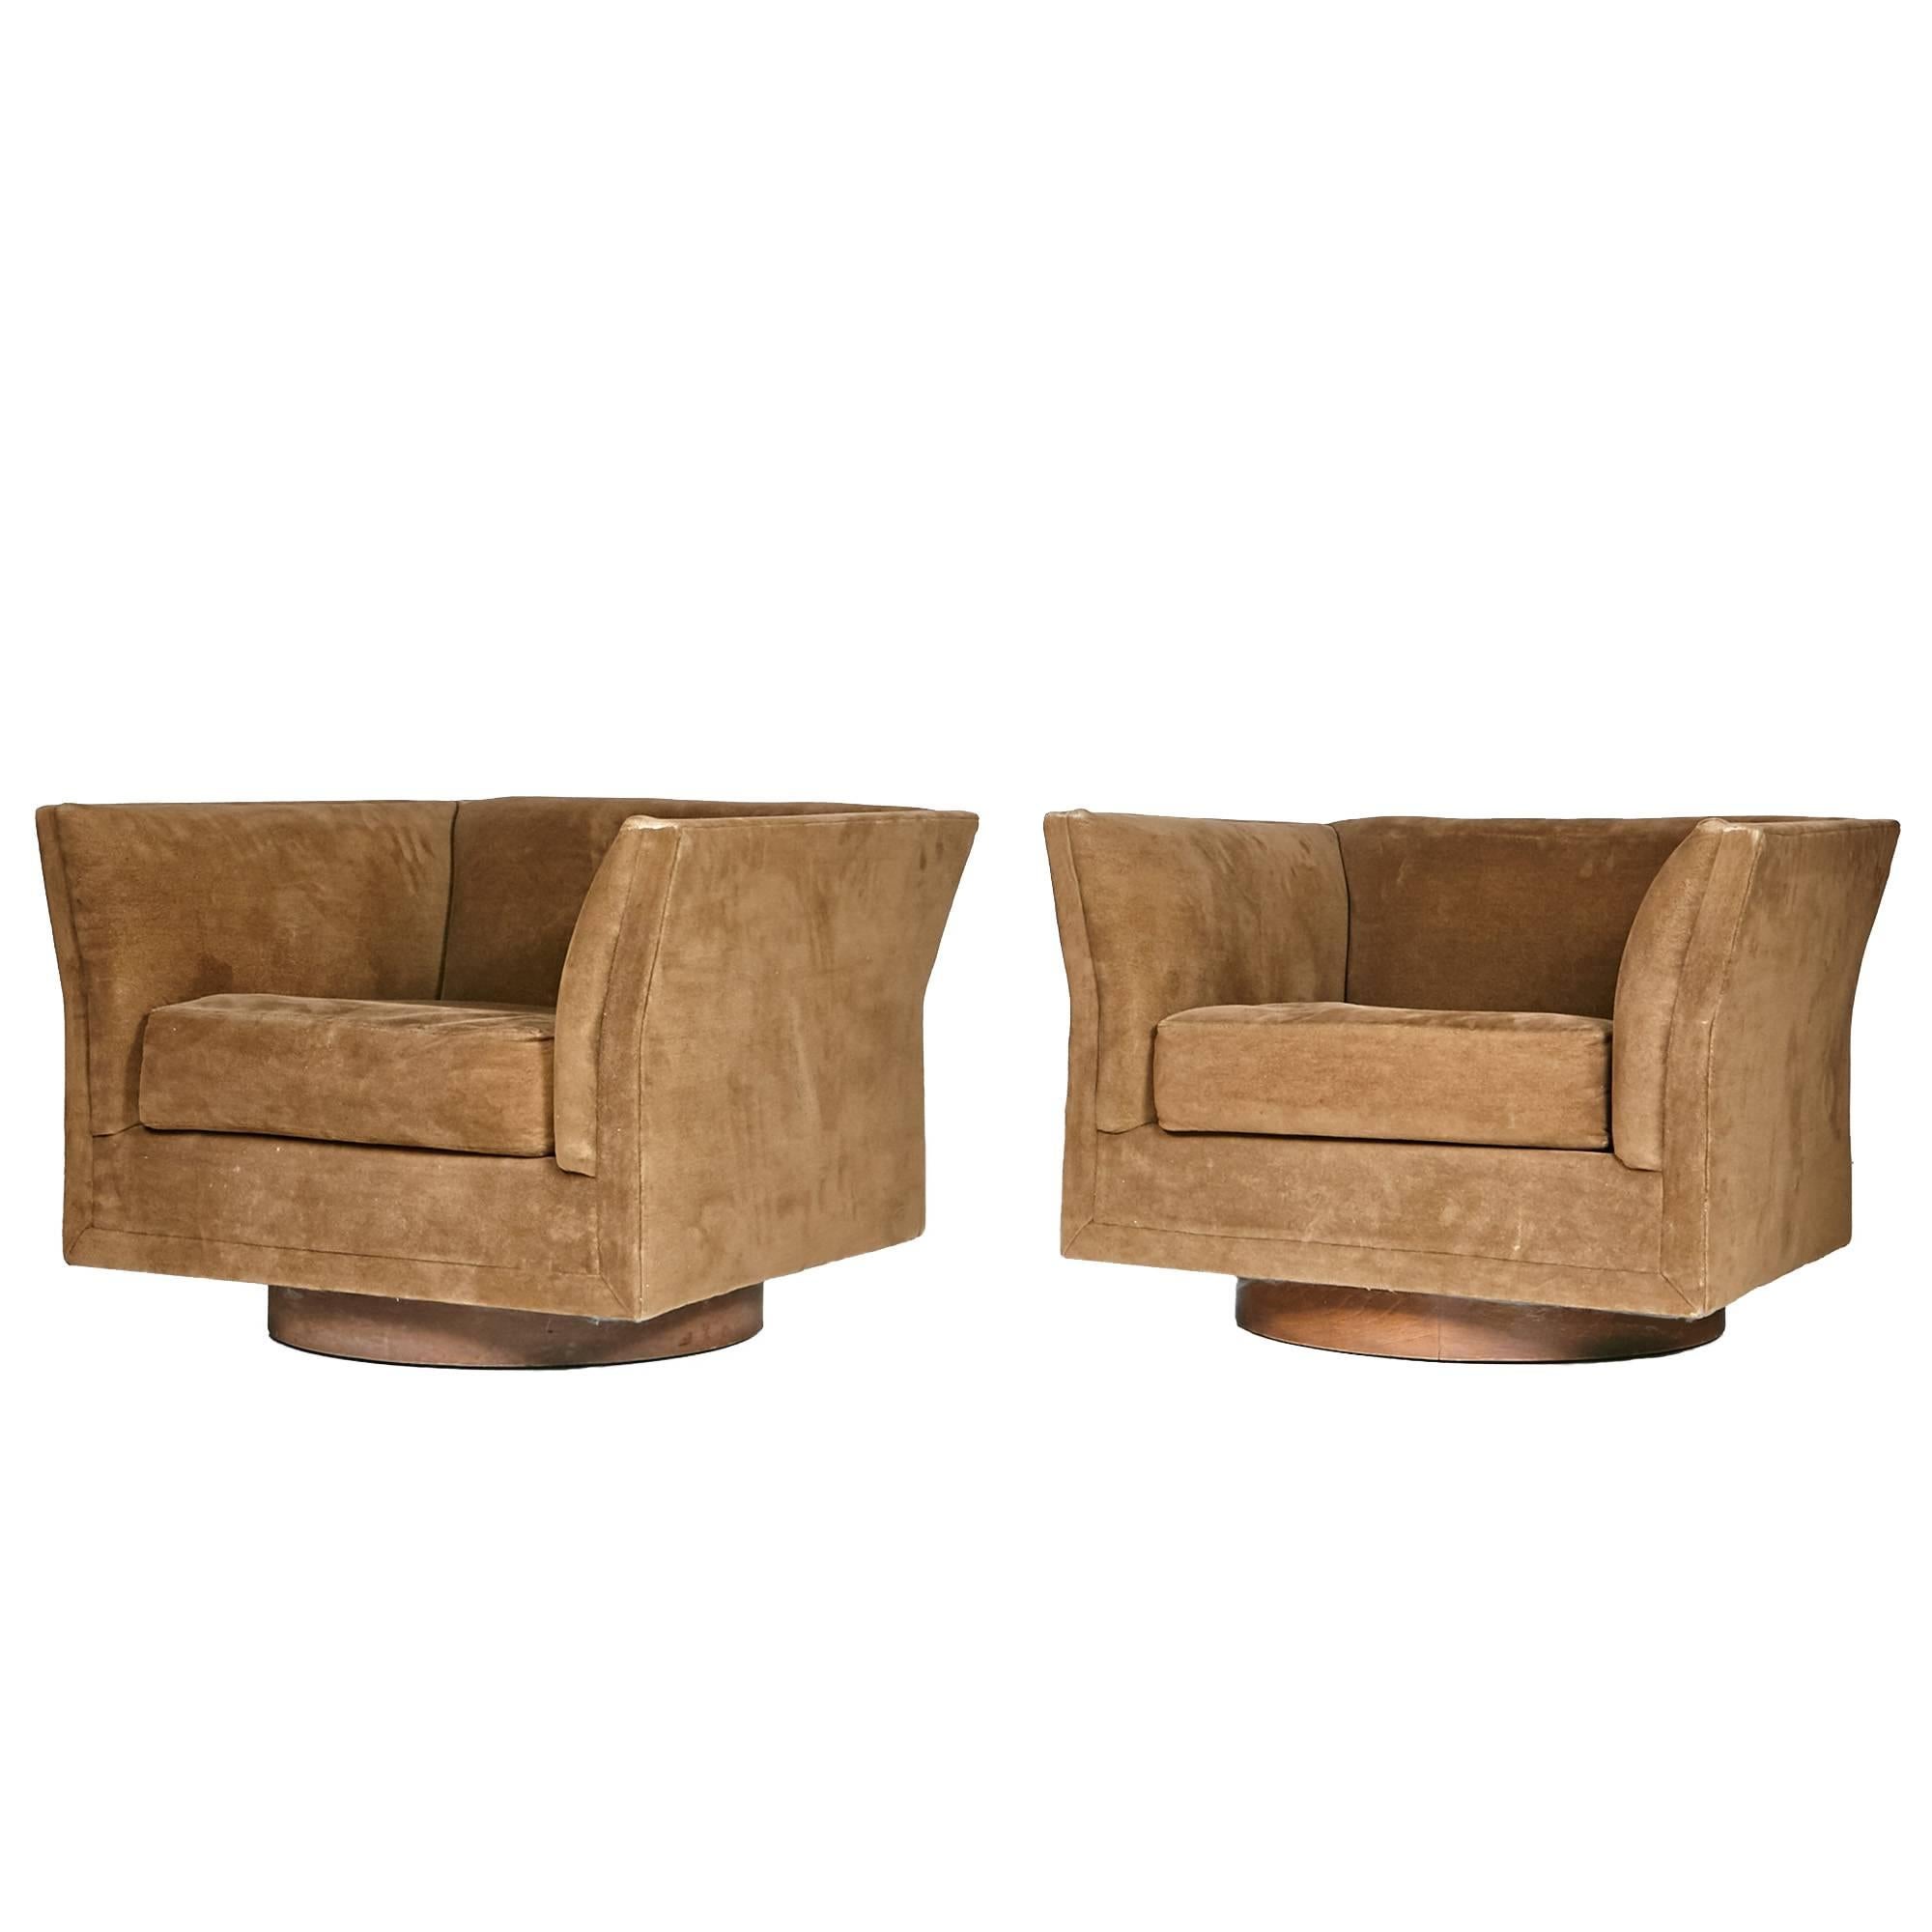 Pair of 1970s Selig walnut base swivel lounge chairs with the original chenille upholstery. The chair backs are curved for seating comfort. The upholstery is in very good condition with wear to the arm edges. New upholstery is recommended. Marked.